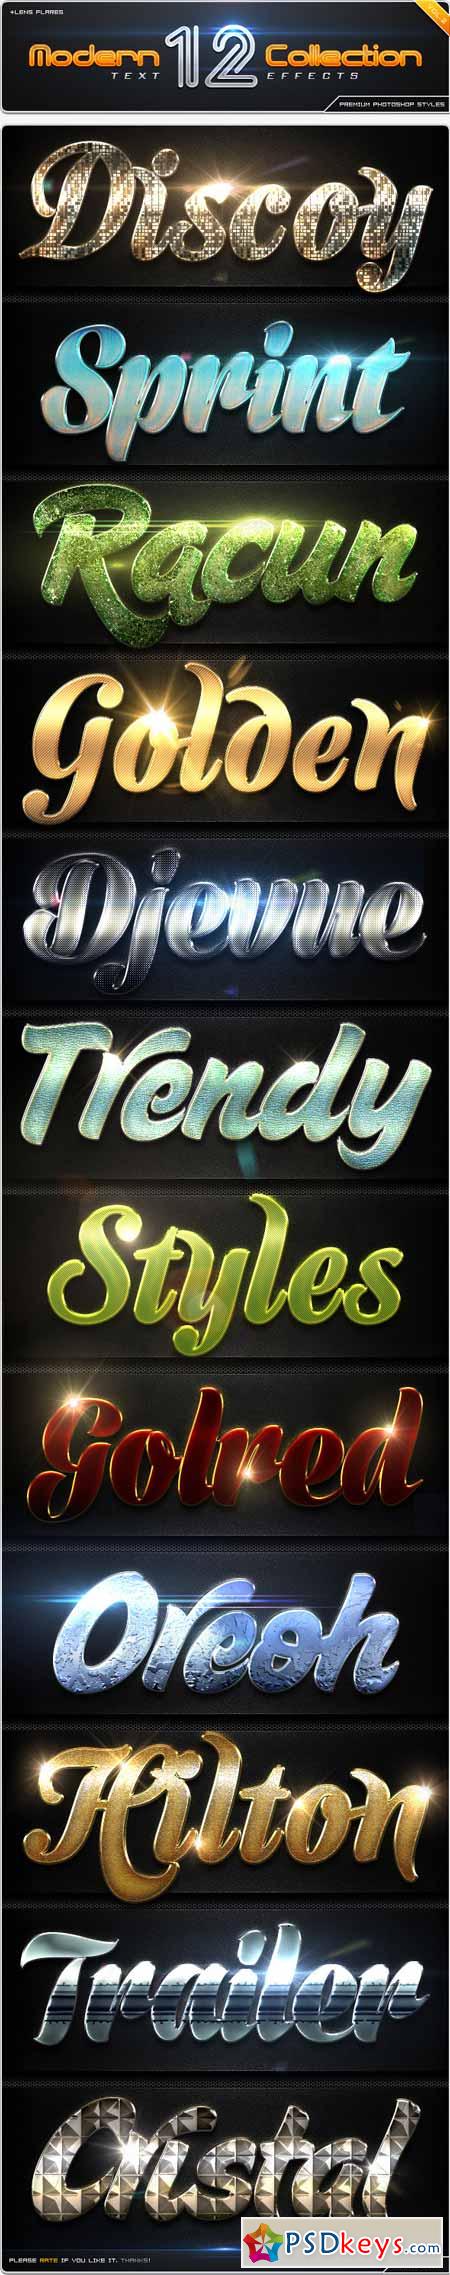 12 Modern Collection Text Effect Styles Vol.2 8816858